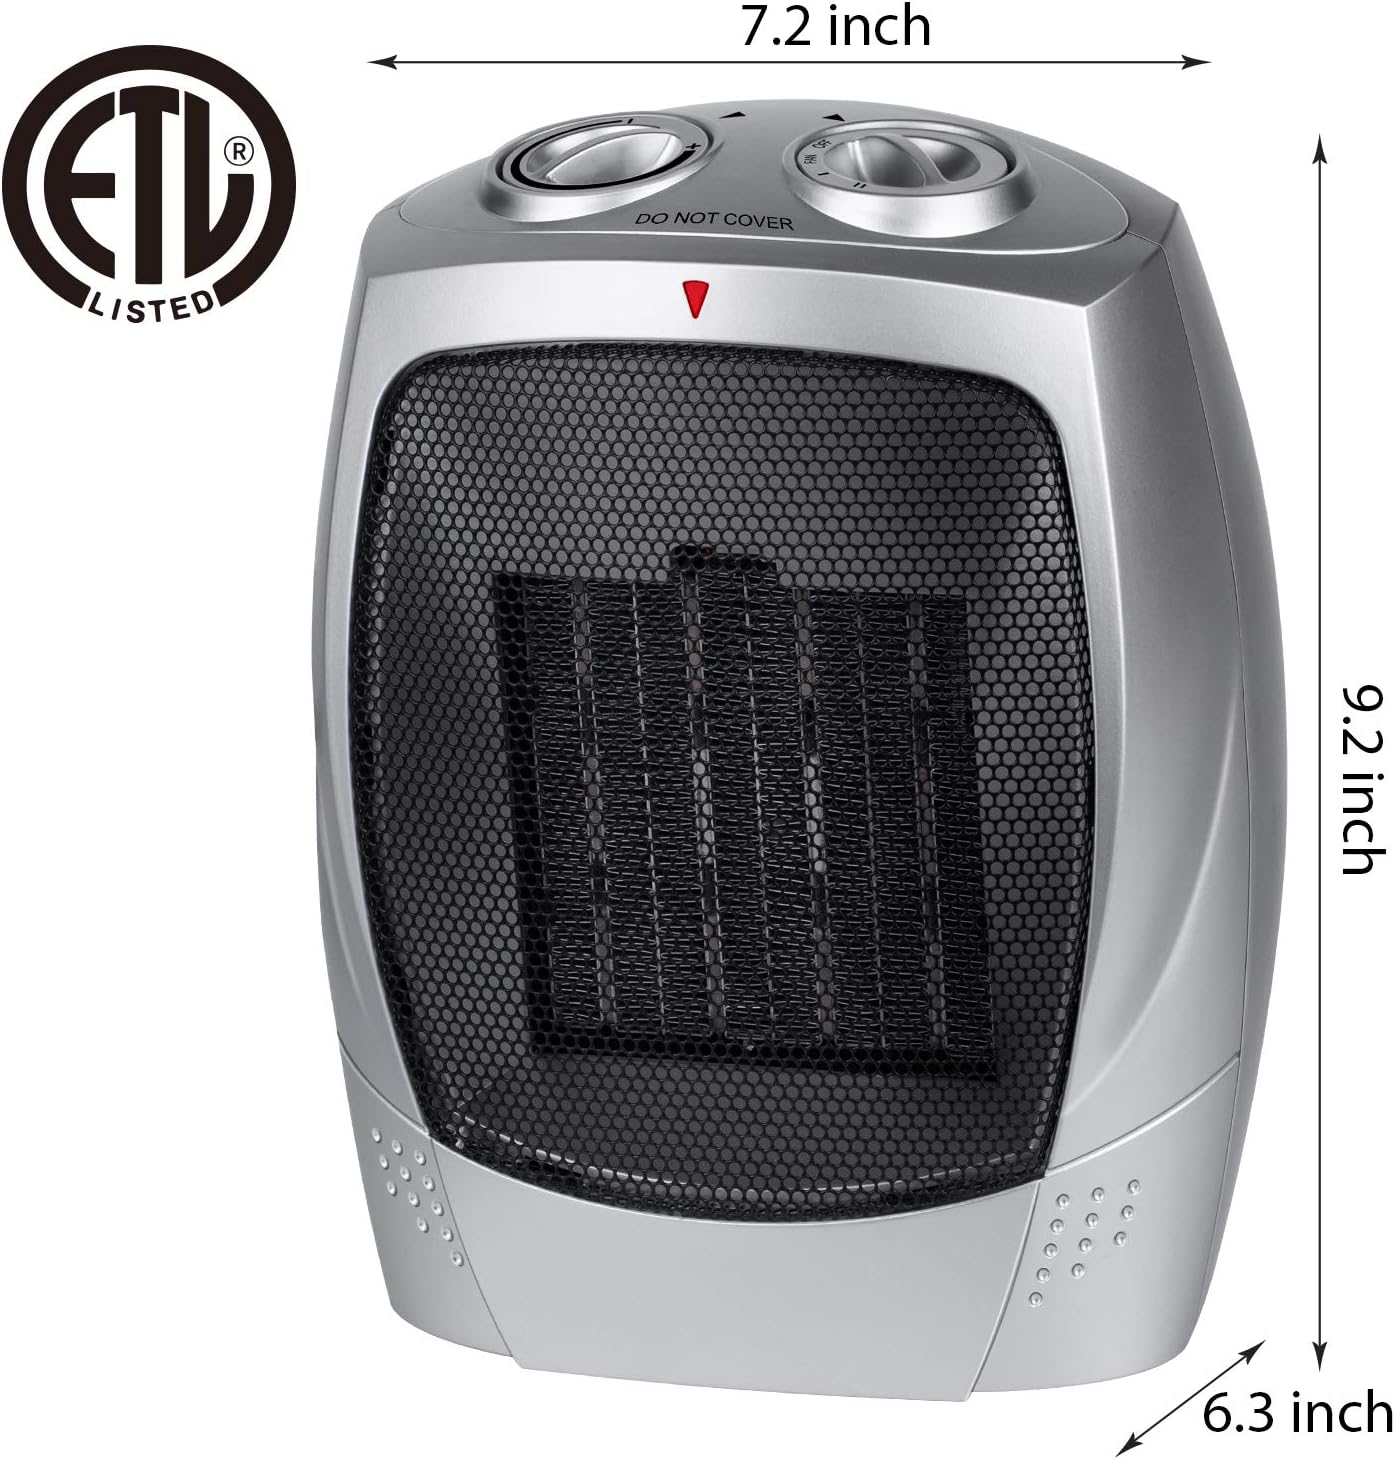 Ceramic Space Heater, 750W/1500W Portable Electric Heater with Adjustable Thermostat, Normal Fan and Safety Tip Over Switch for Bedroom Office Desk Indoor Use (Silver)